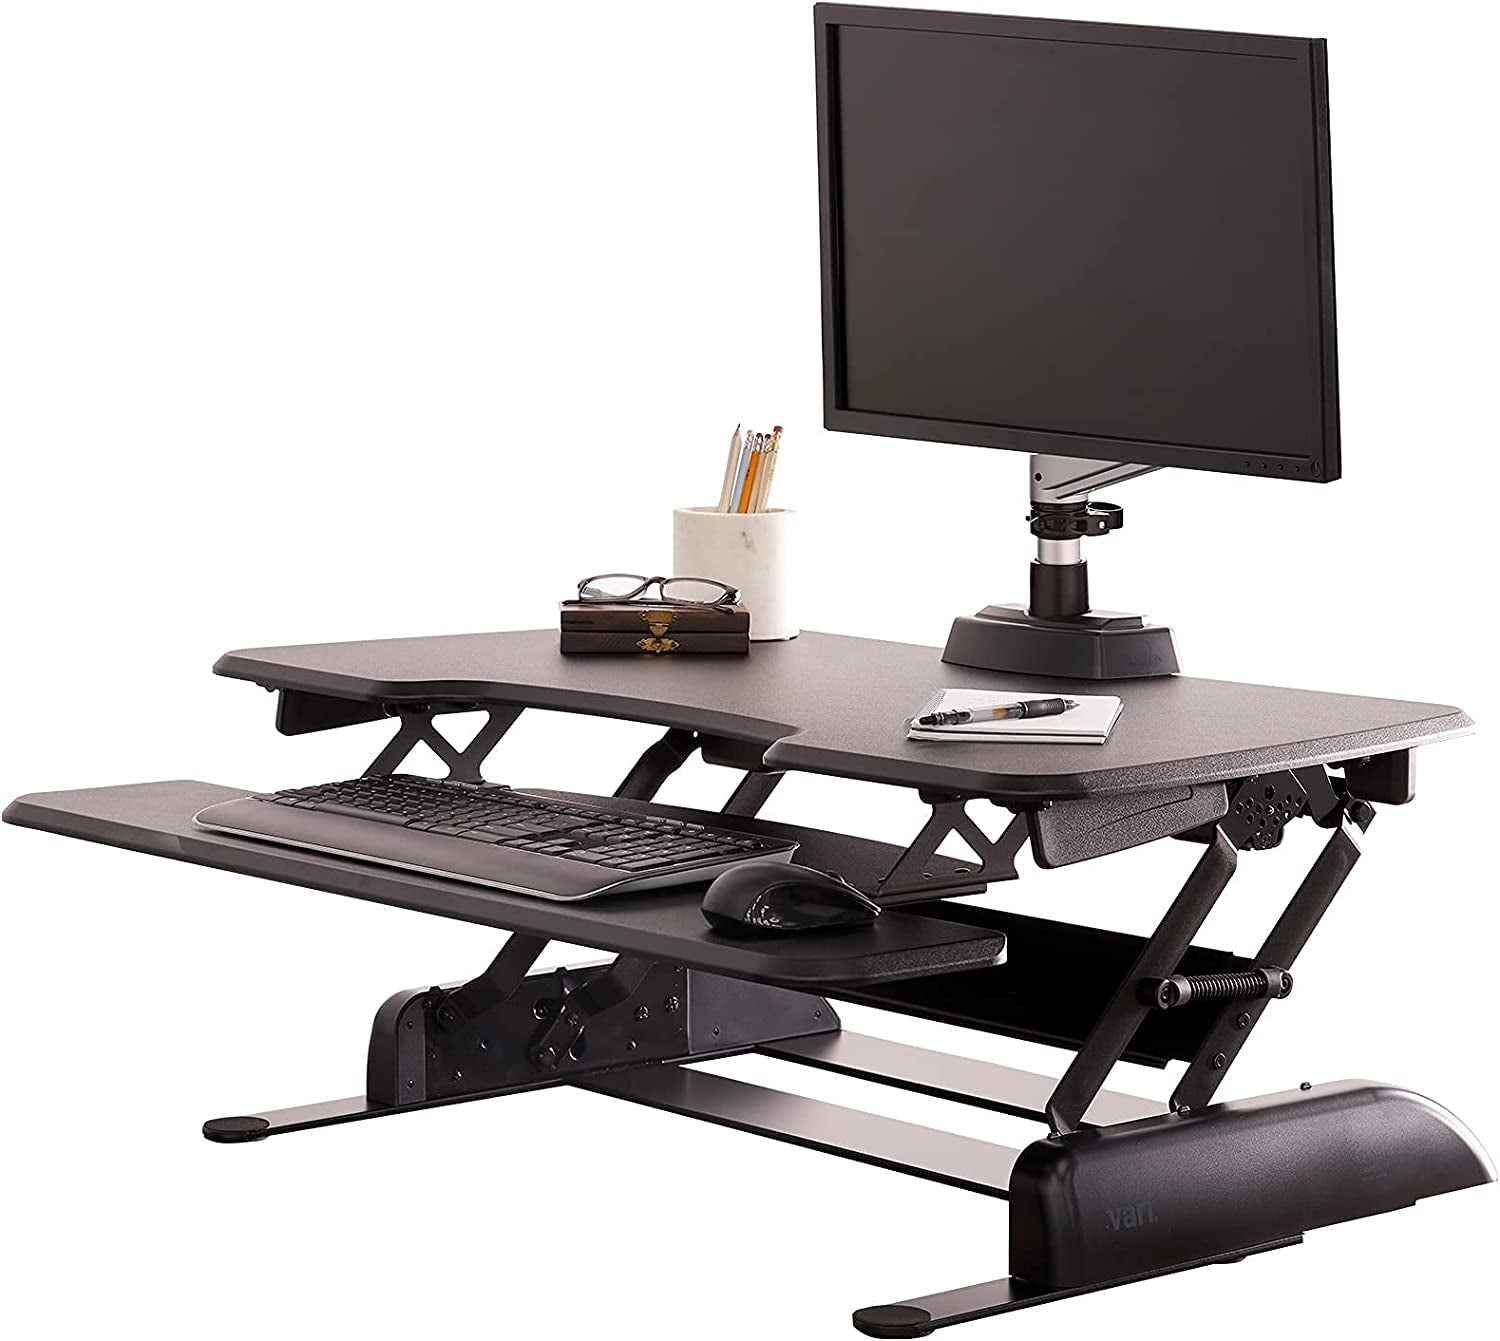 Fully Assembled Two-Tier Height Adjustable Standing Desk Converter with Monitor & Accessories Space, 36" Wide, for Home Office - Black